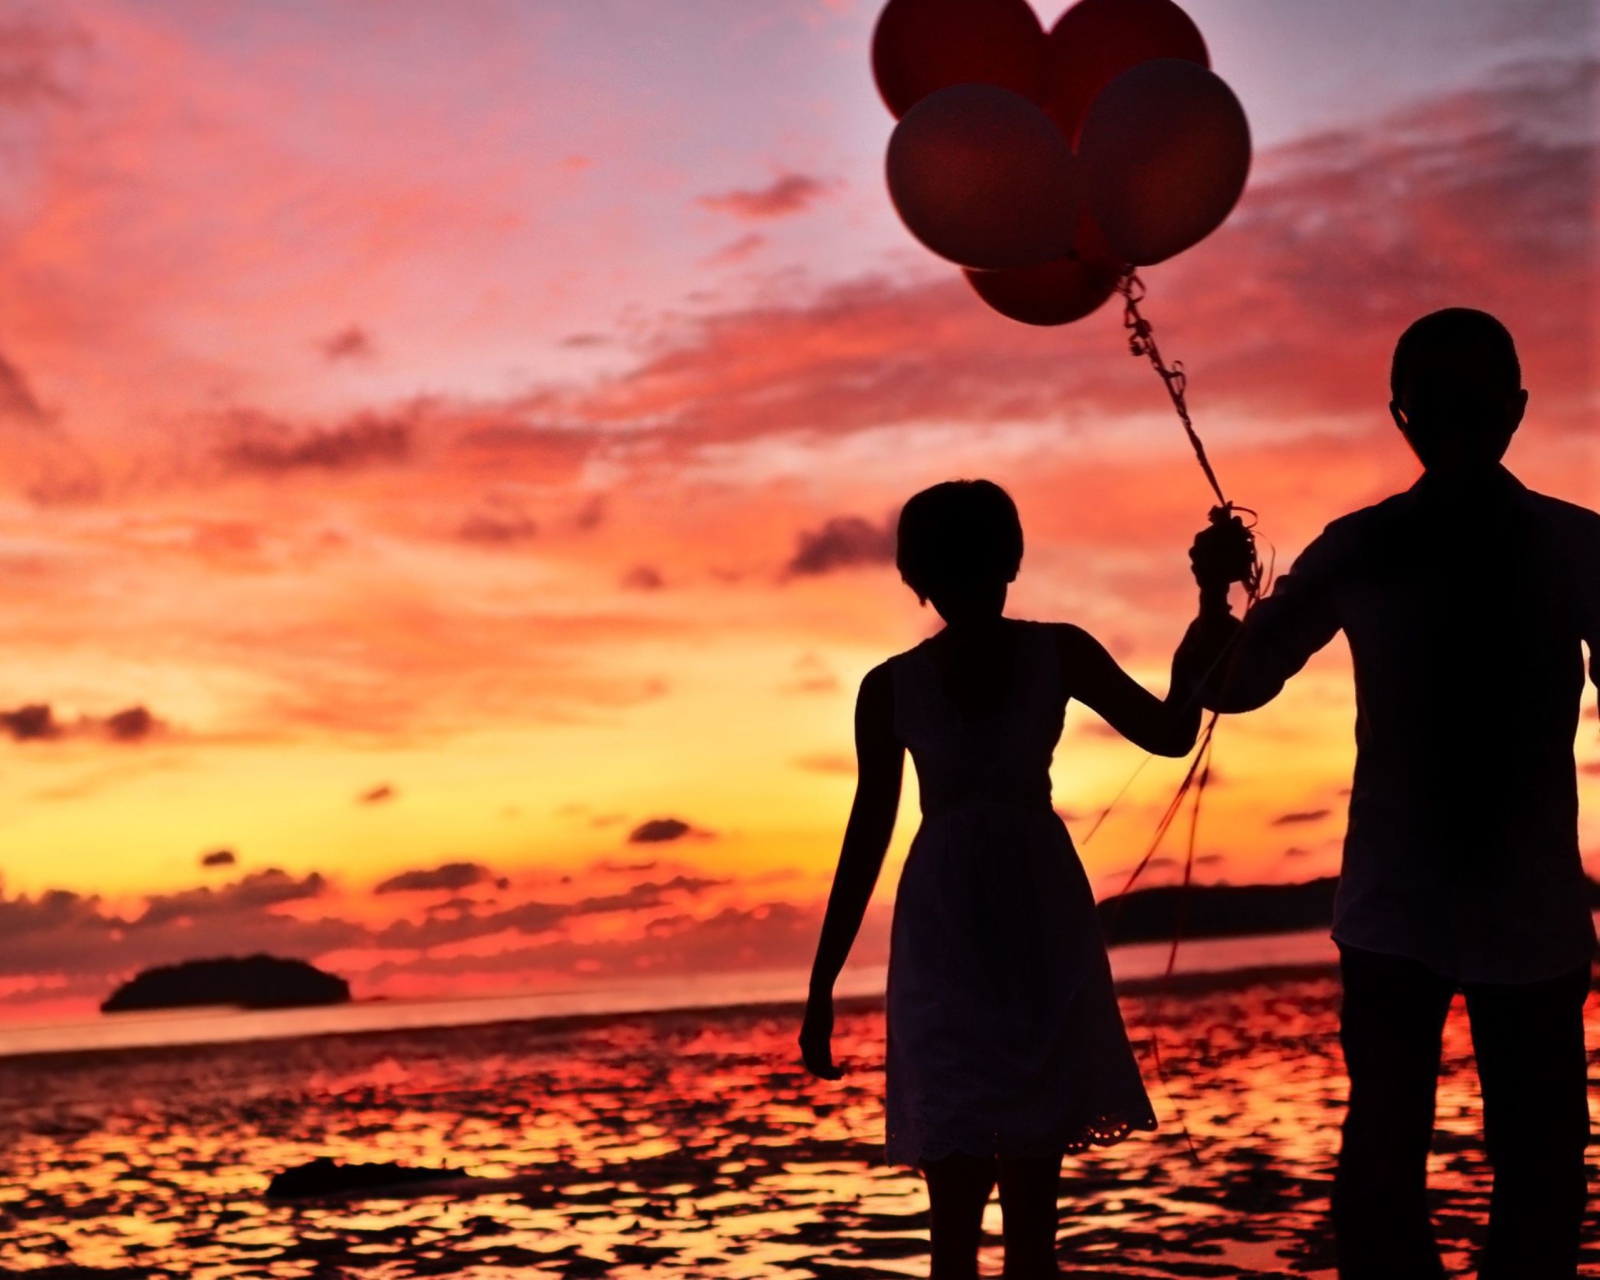 Couple With Balloons Silhouette At Sunset screenshot #1 1600x1280